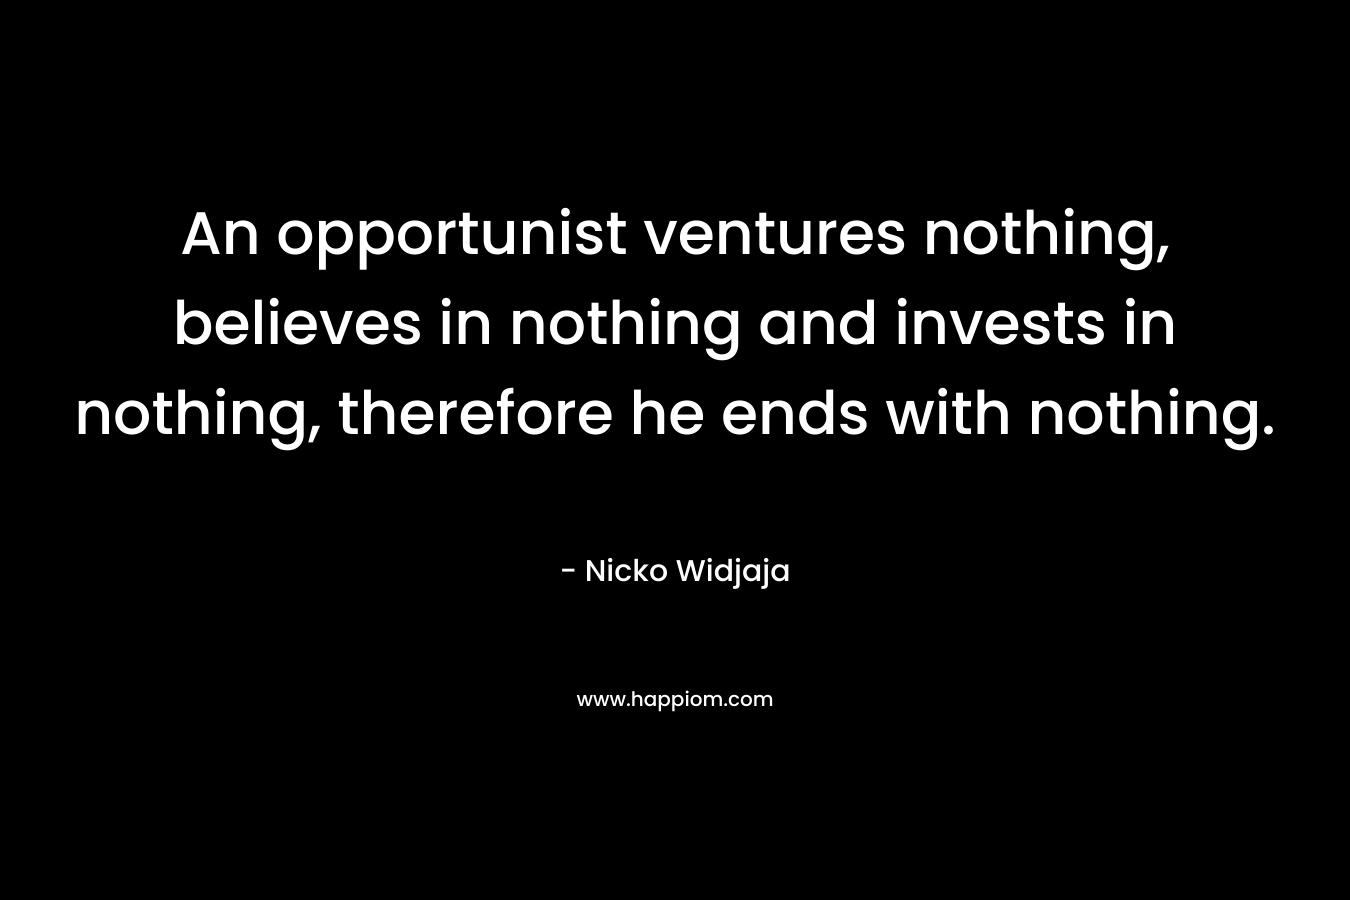 An opportunist ventures nothing, believes in nothing and invests in nothing, therefore he ends with nothing.